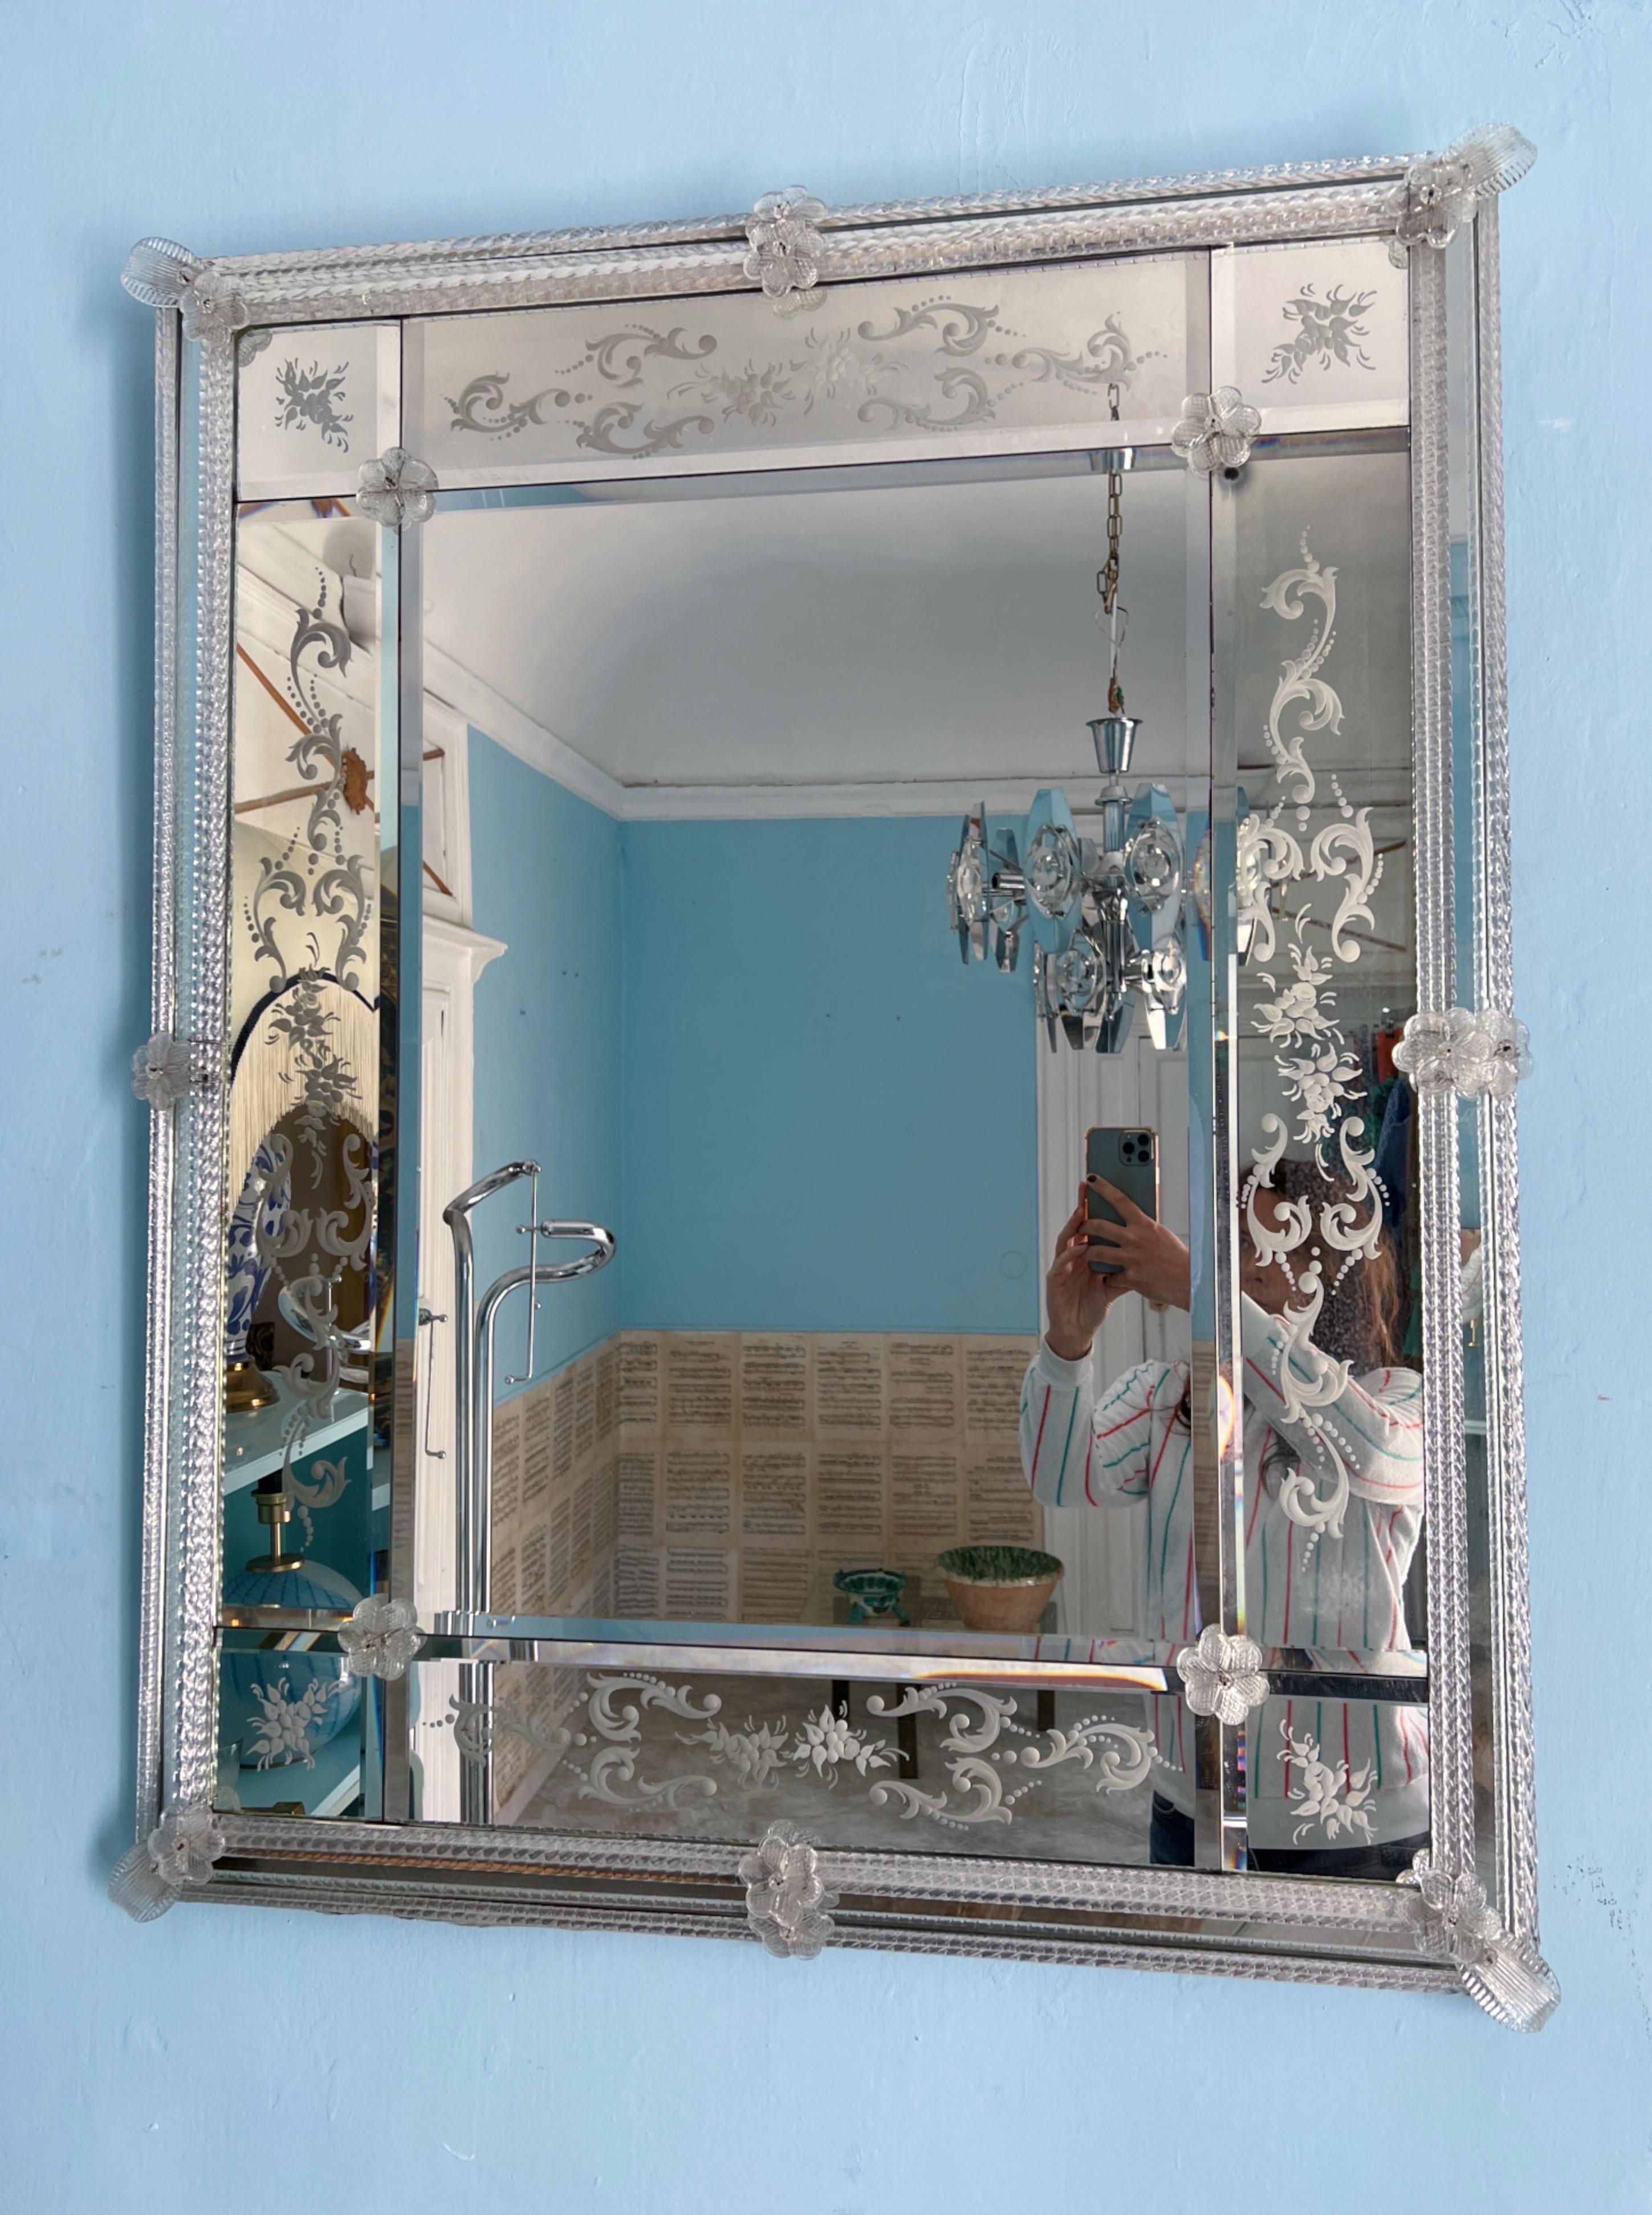 This magnificent Venetian mid-century wall mirror, crafted in the authentic Venetian style, hails from Murano in the 1980s. Its rectangular silhouette is embellished with a border composed of meticulously cut mirror tiles.

The frame is a tribute to